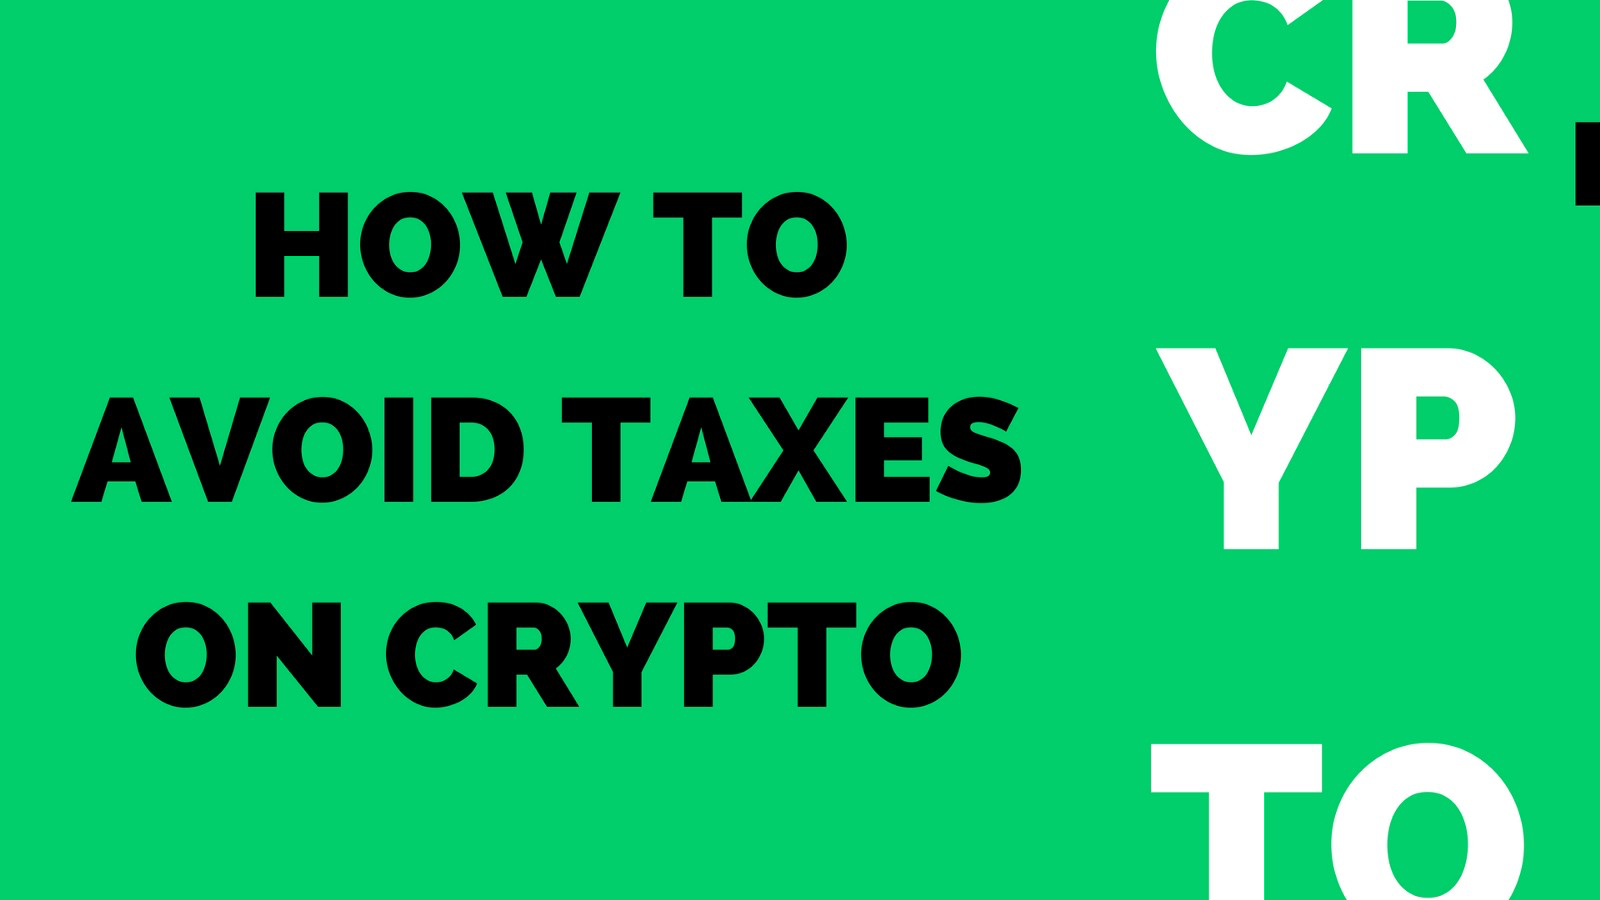 Bought bitcoin last year? Here’s how to save money on your crypto taxes